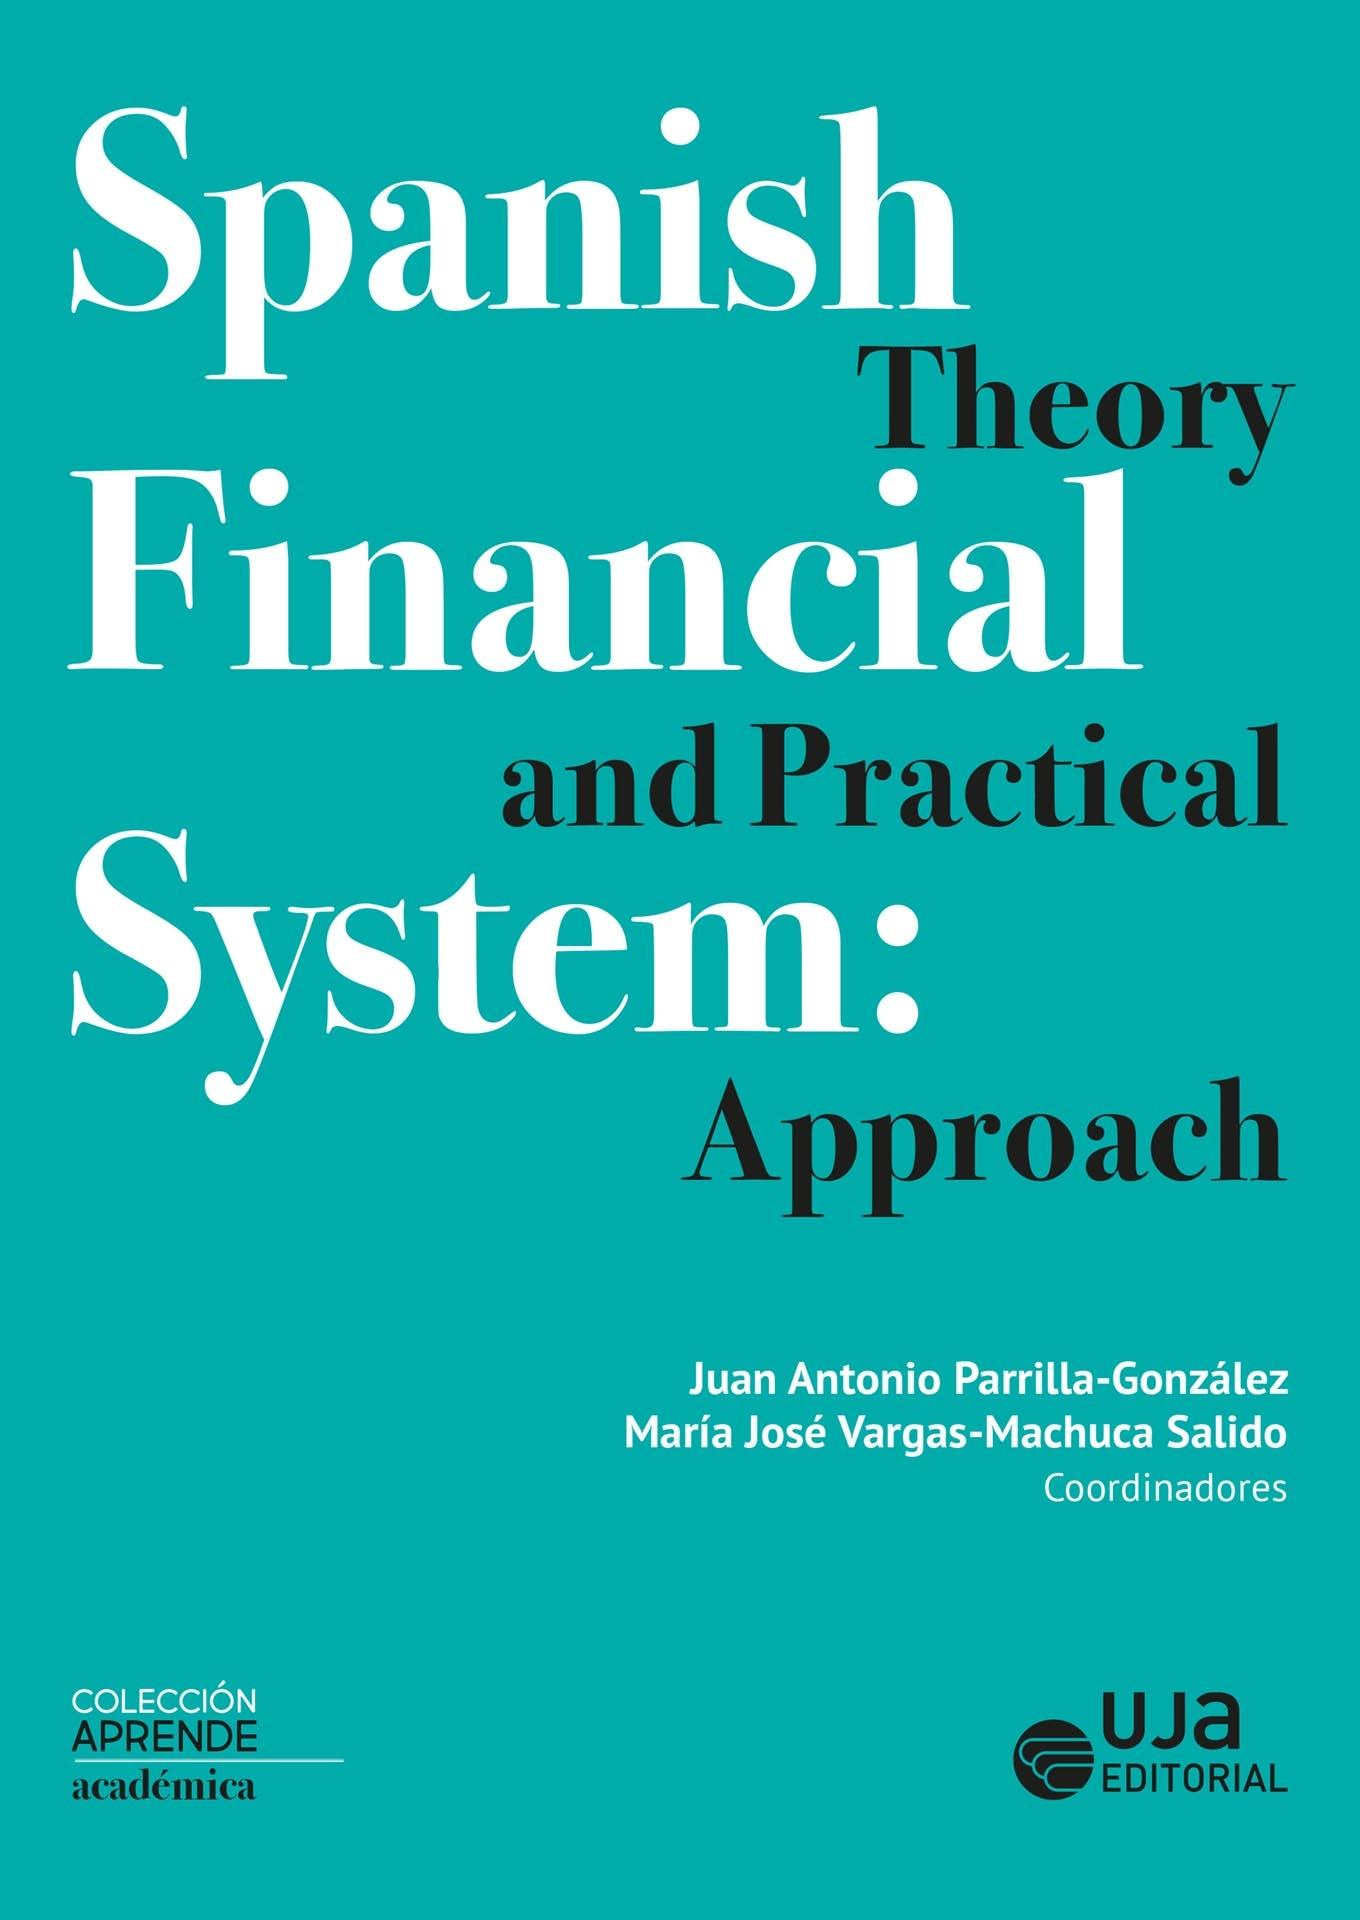 Spanish Financial System "Theory and Practical Approach"